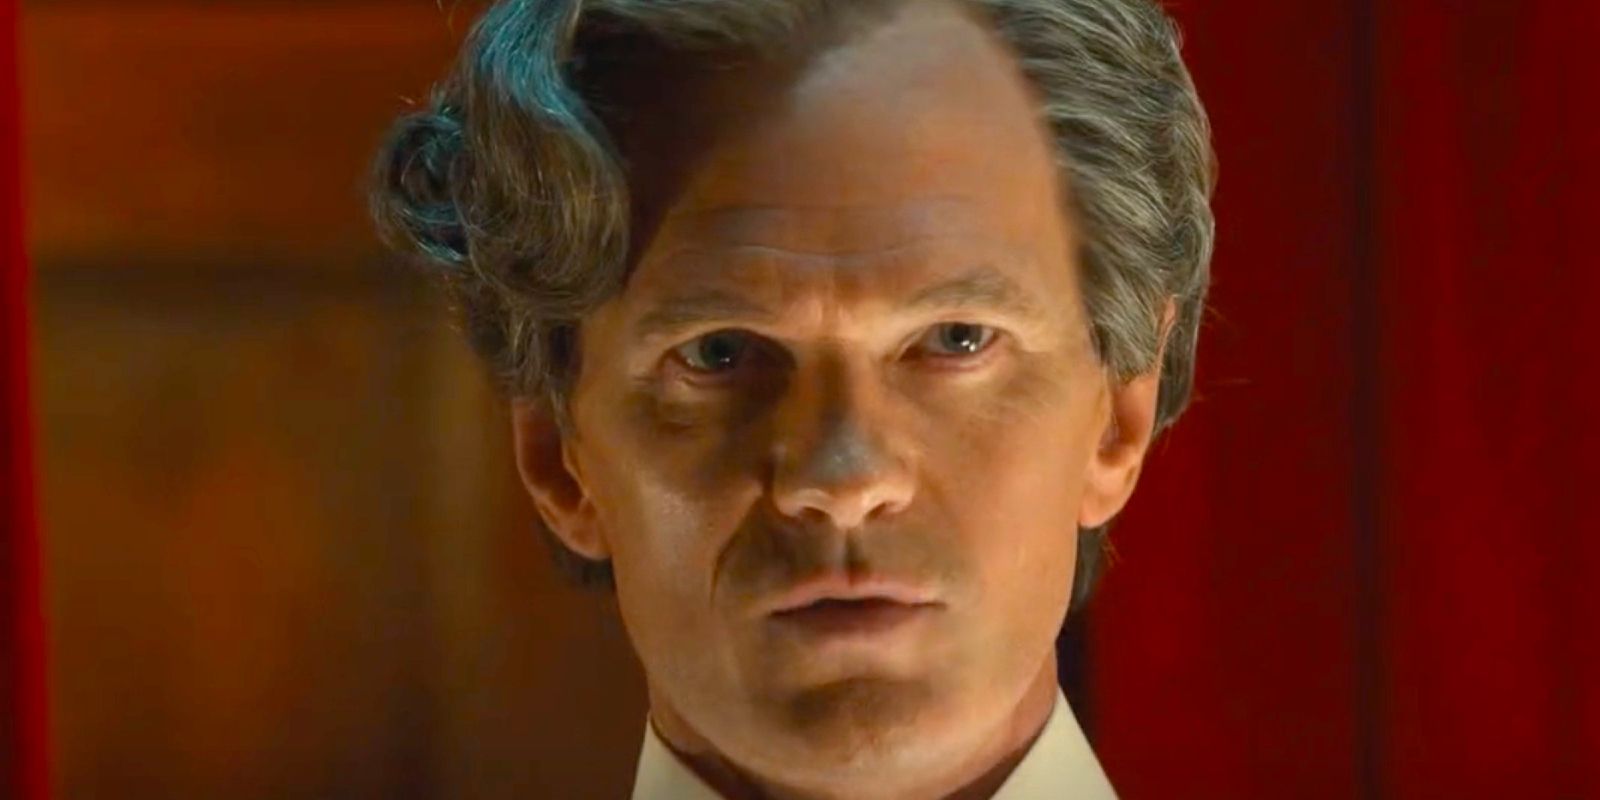 Neil Patrick Harris as The Toymaker looking serious in Doctor Who 60th anniversary special The Giggle.